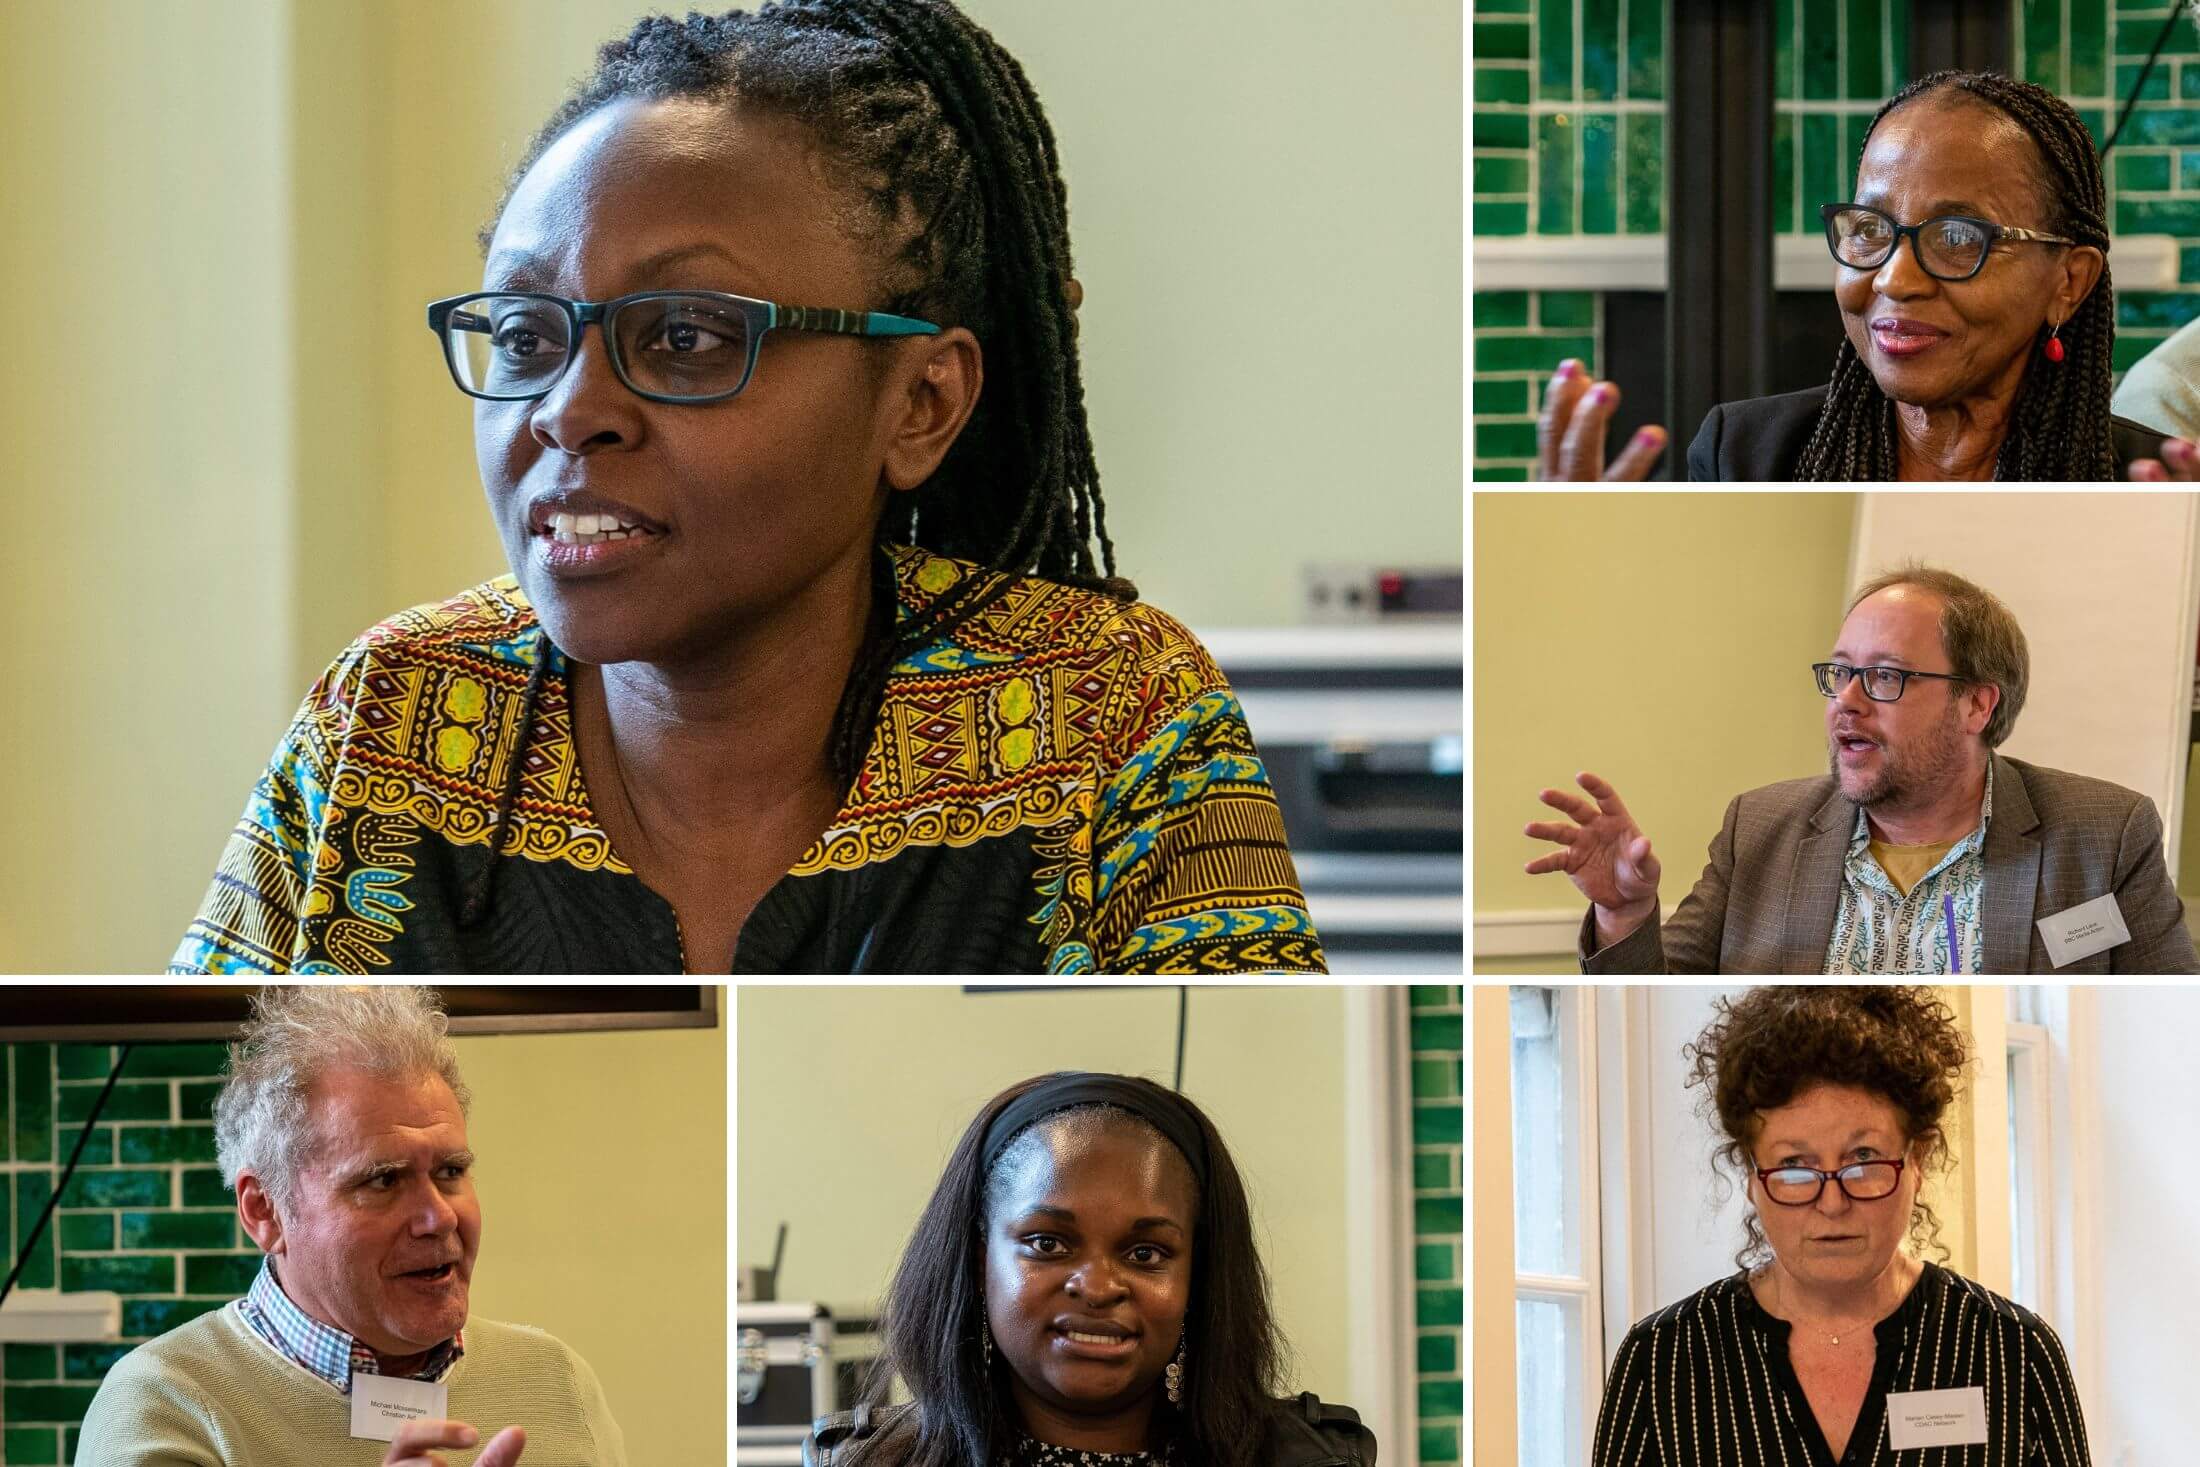 A collage of six individuals speaking: three black women, one woman and two white men